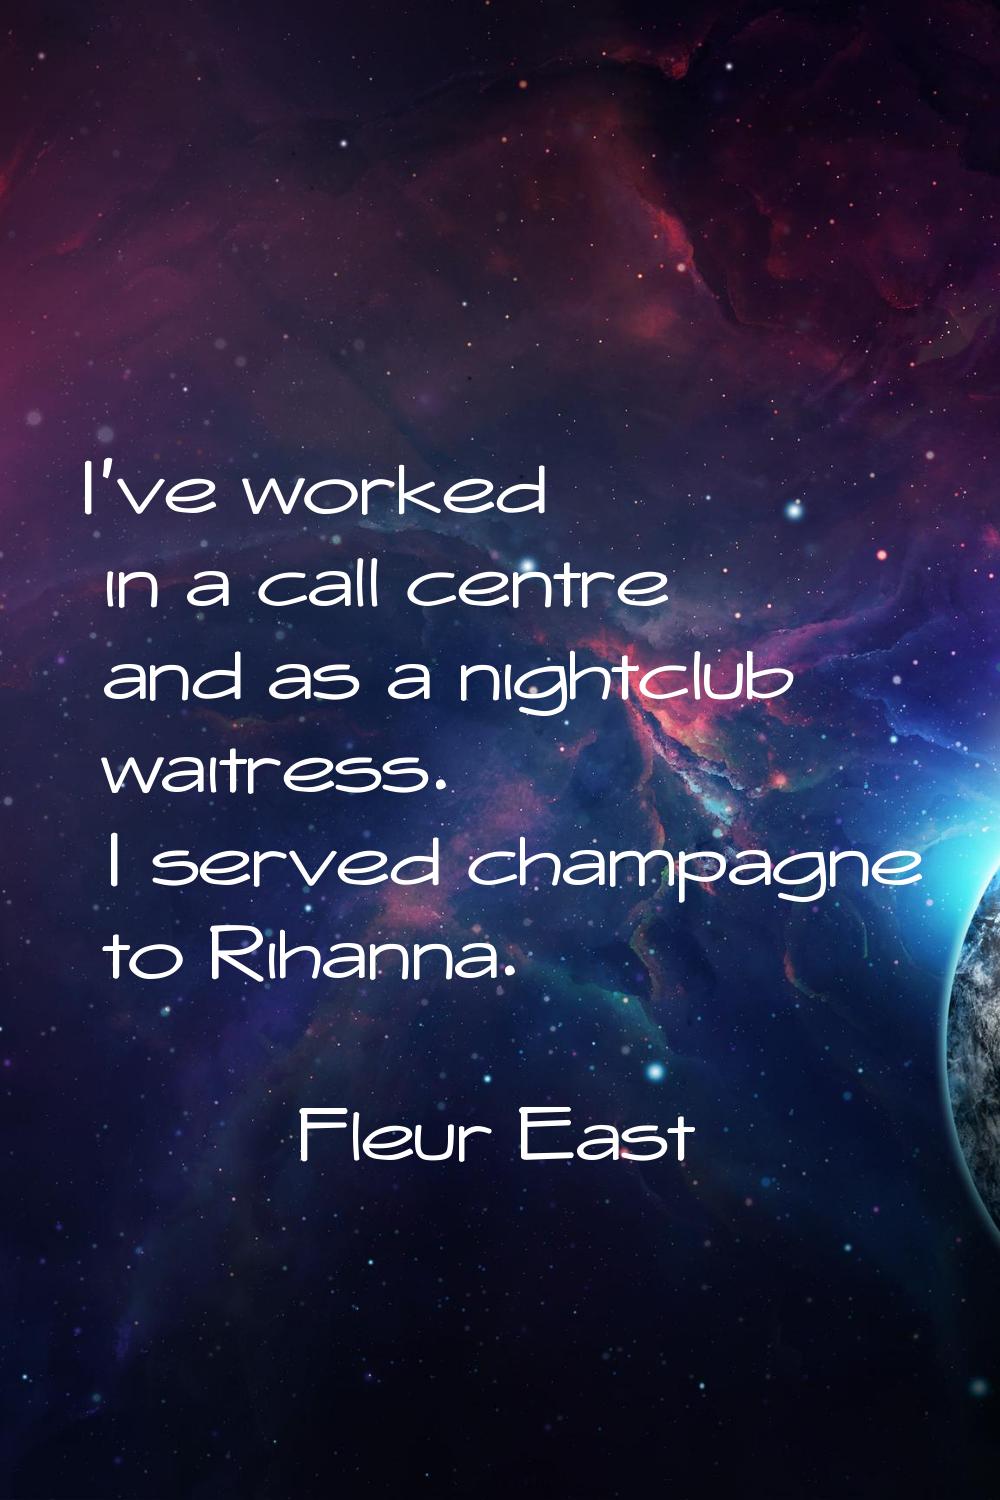 I've worked in a call centre and as a nightclub waitress. I served champagne to Rihanna.